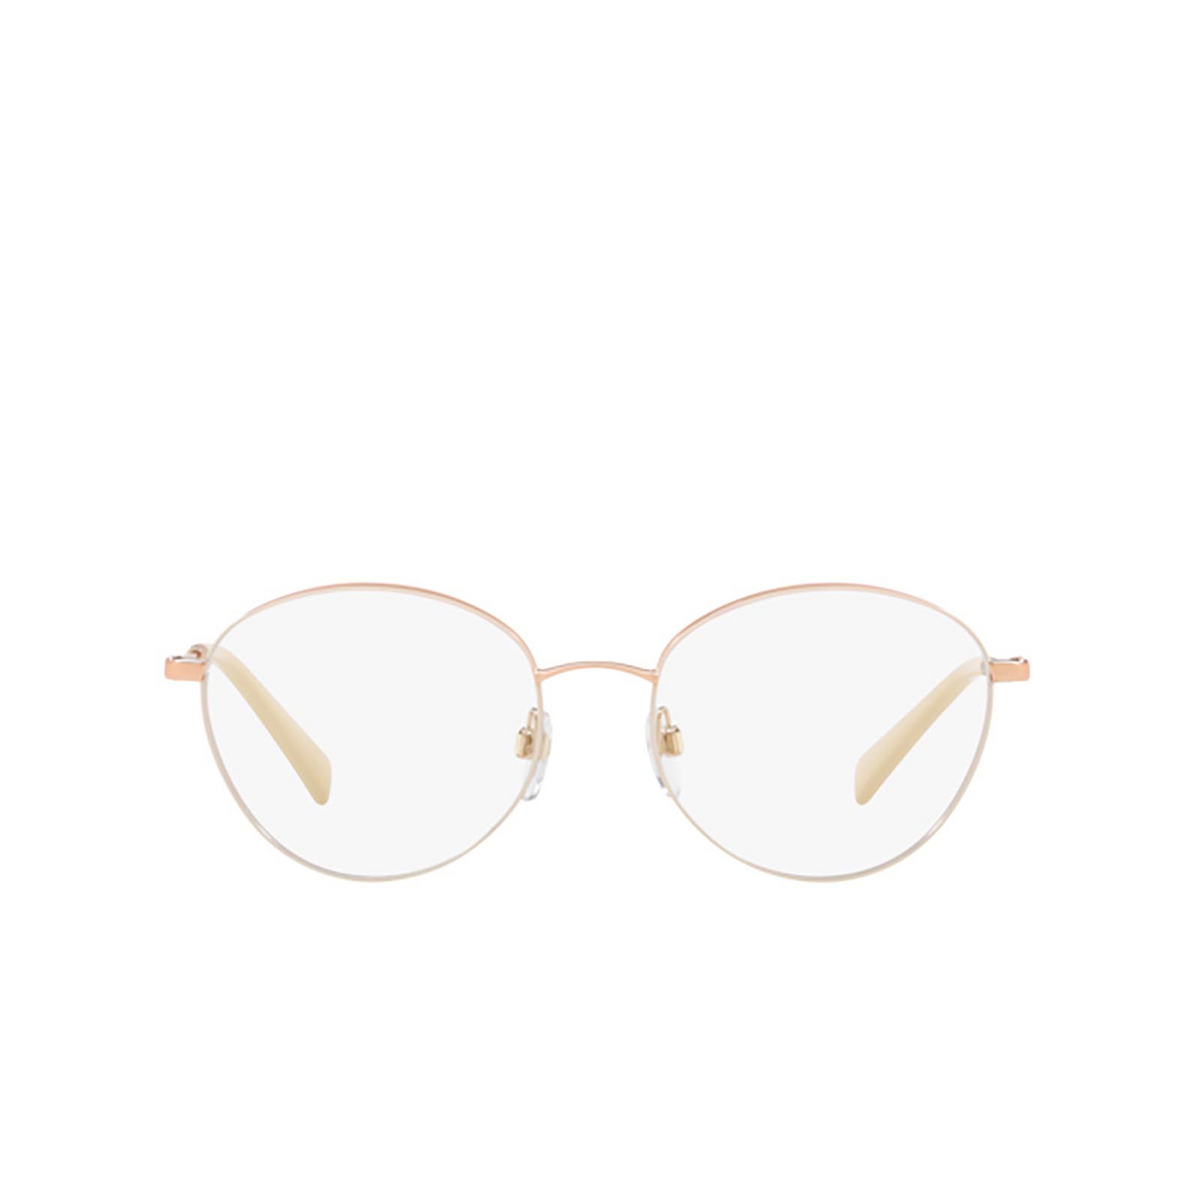 Valentino® Oval Eyeglasses: VA1003 color Rose Gold / Poudre 3013 - front view.